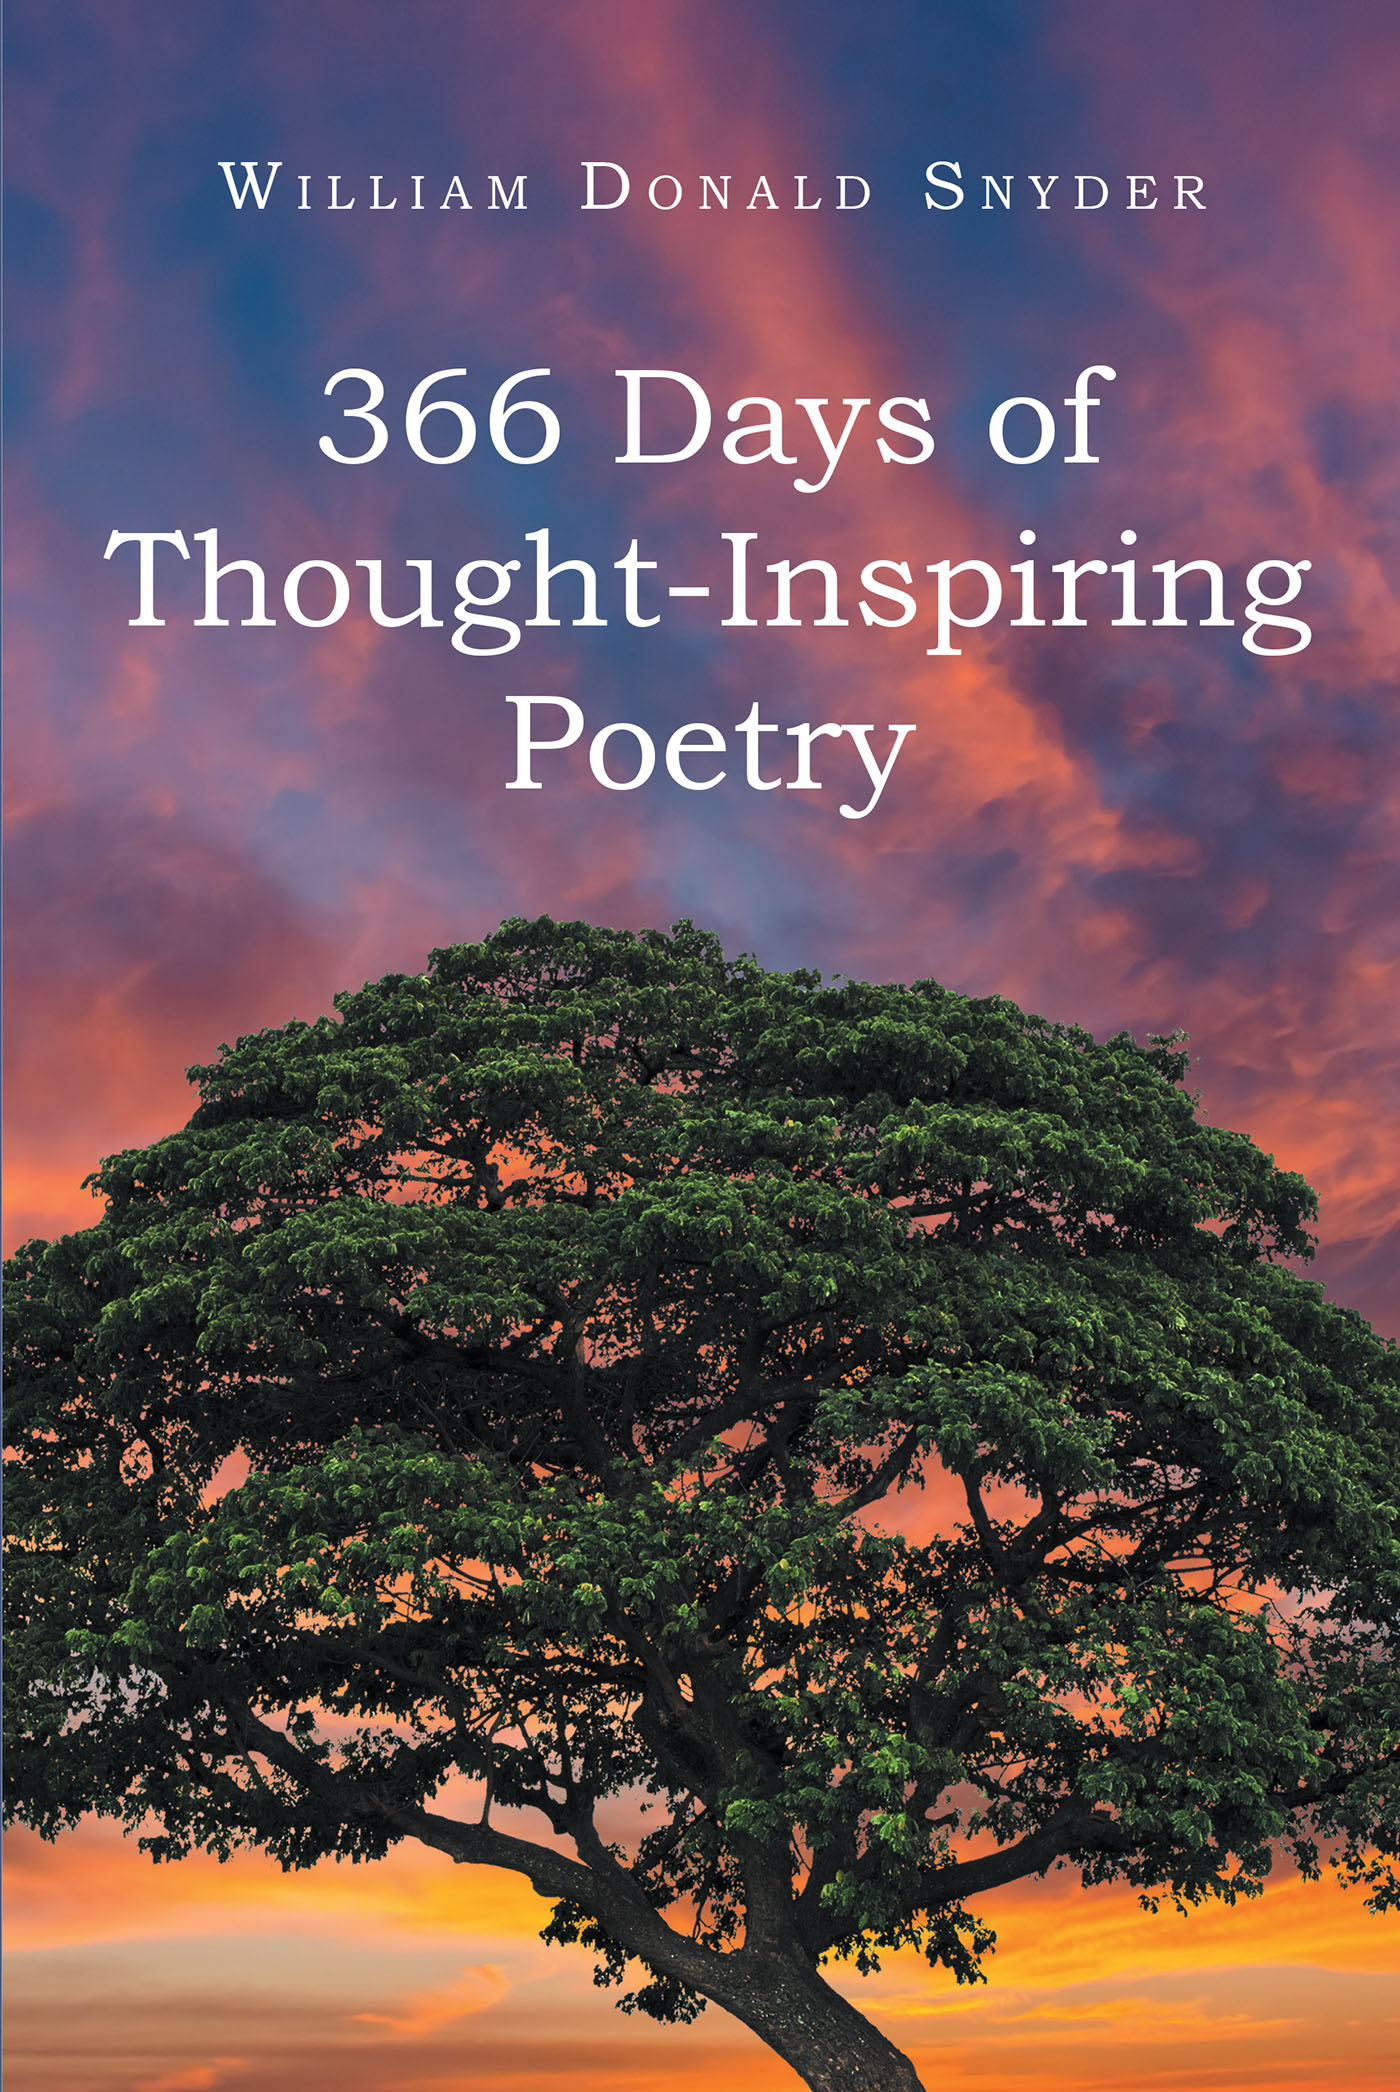 Author William Donald Snyder’s New Book, "366 Days of Thought-Inspiring Poetry," Inspires Gratitude and Evokes Positive Feelings for All Readers